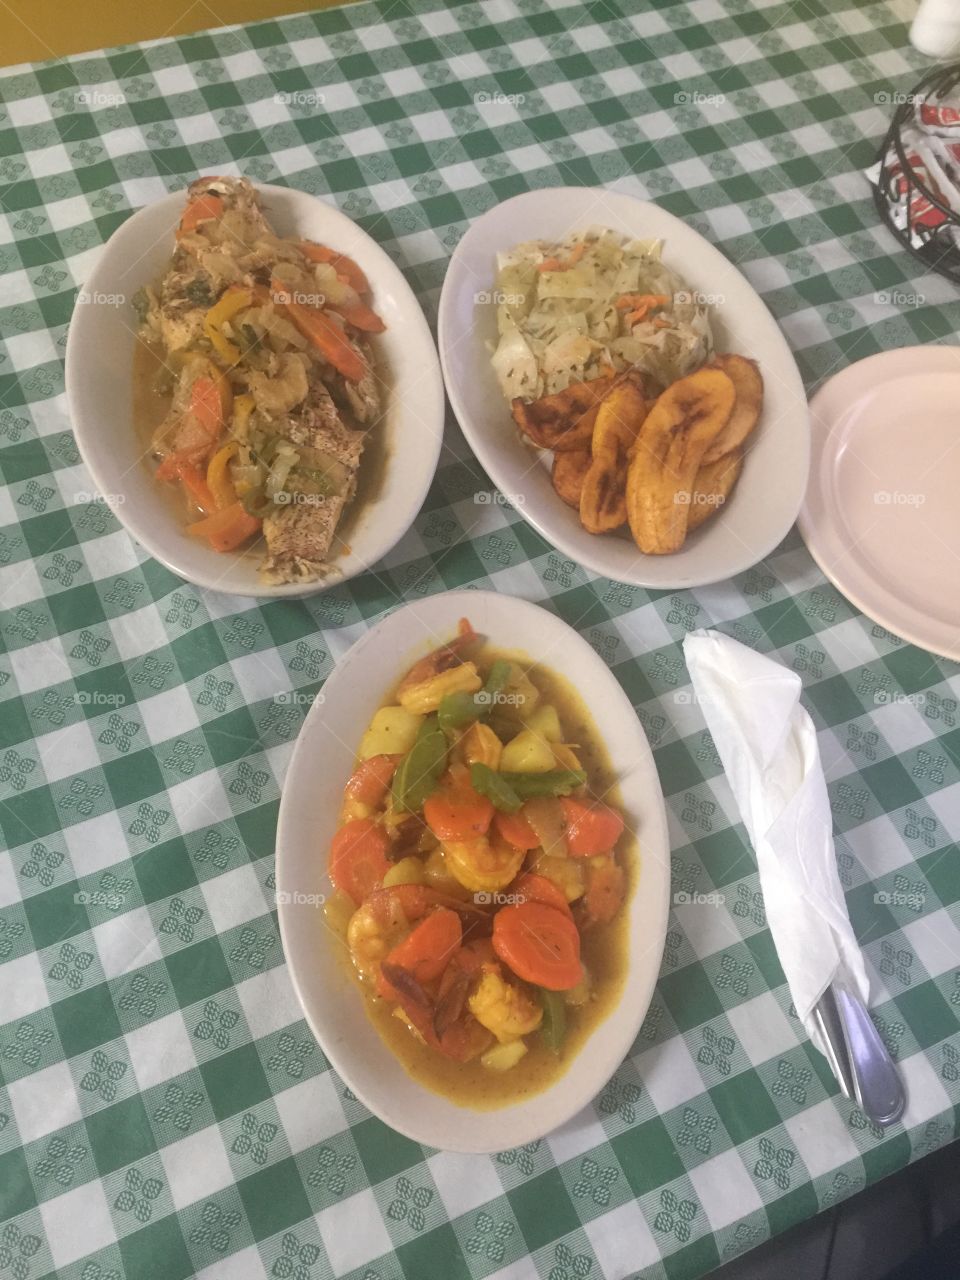 Dinner is served island style: Steamed Red Snapper, curried shrimp with Steamed cabbage and Fried Plantains.